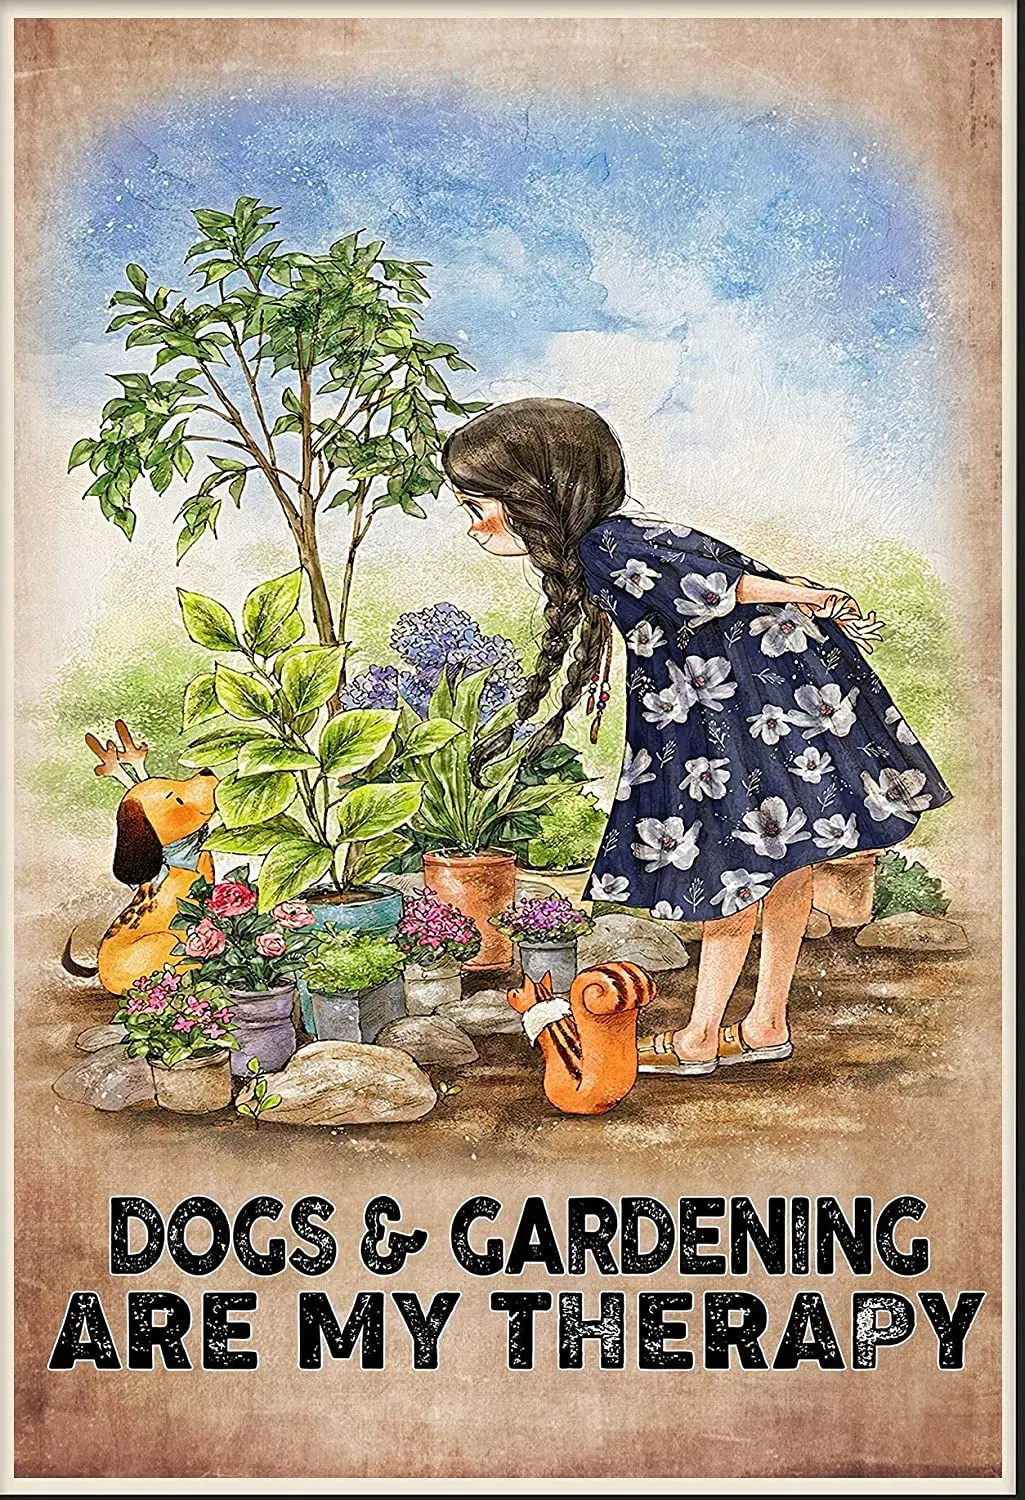 

Dogs and Gardening are My Treatment, A Gift for Dog Lovers, Girls Love Gardens, The Tin Sign Metal Sign Metal Sign Tin Sign Wall